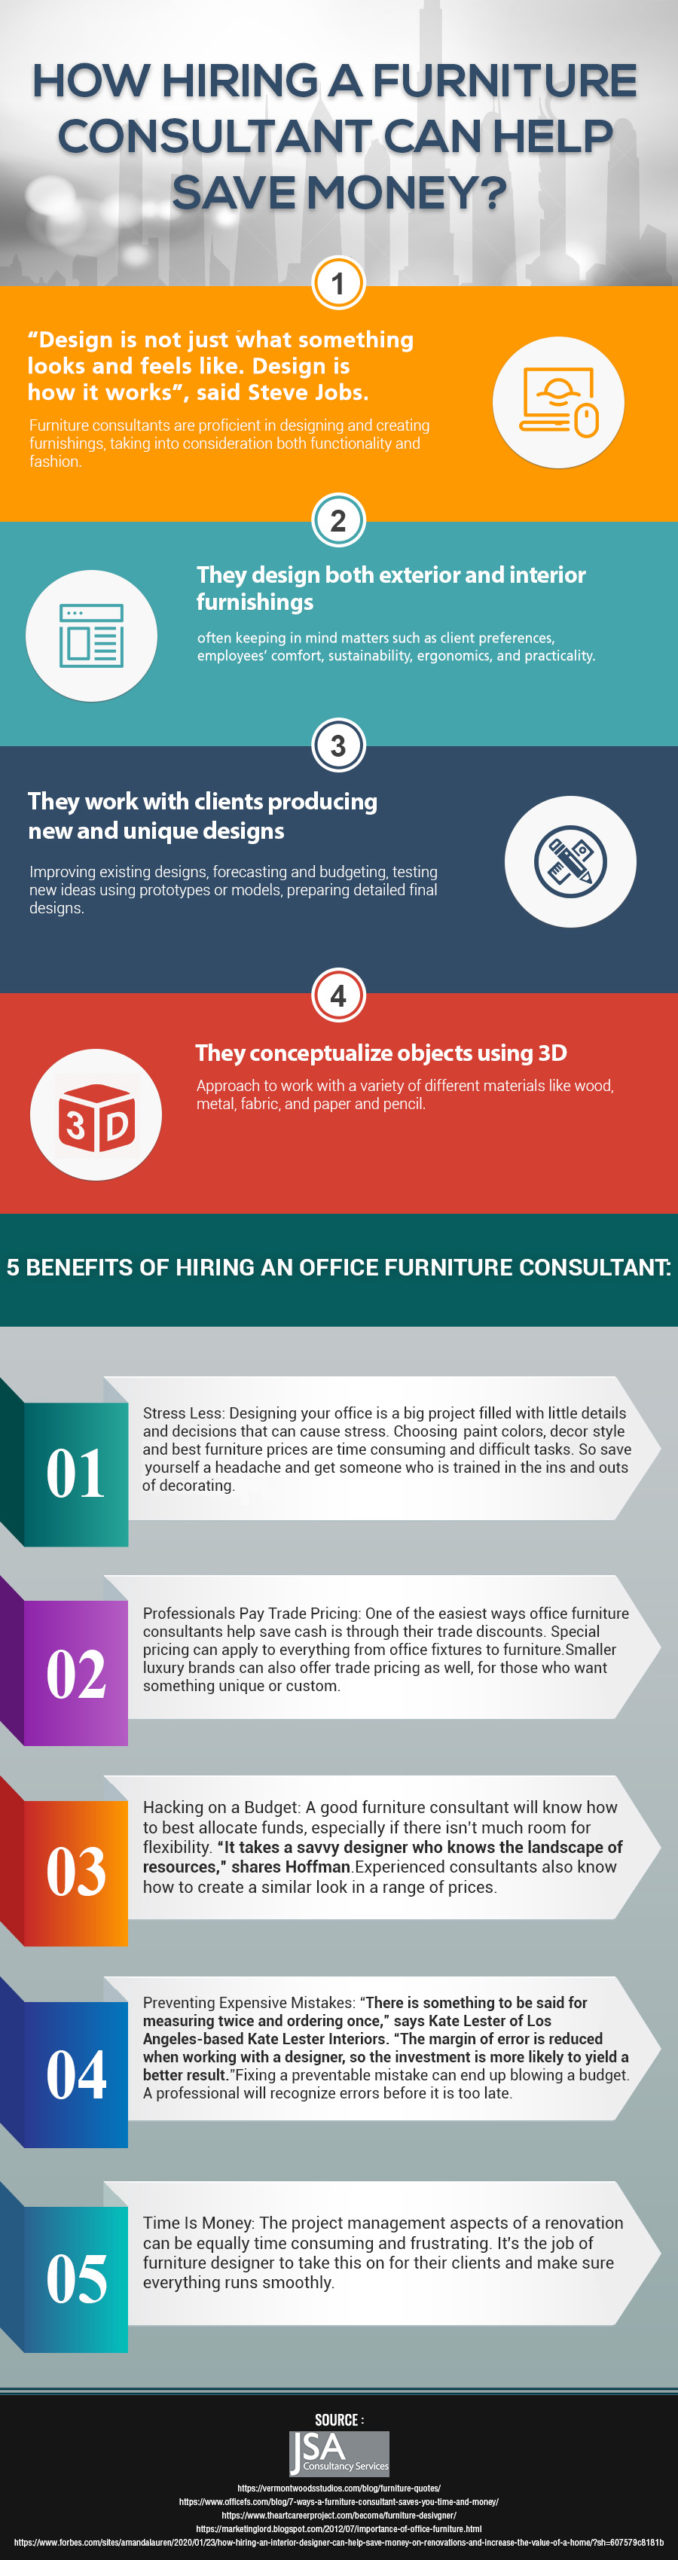 [Infographic] How Hiring a Furniture Consultant Can Help Save Money?